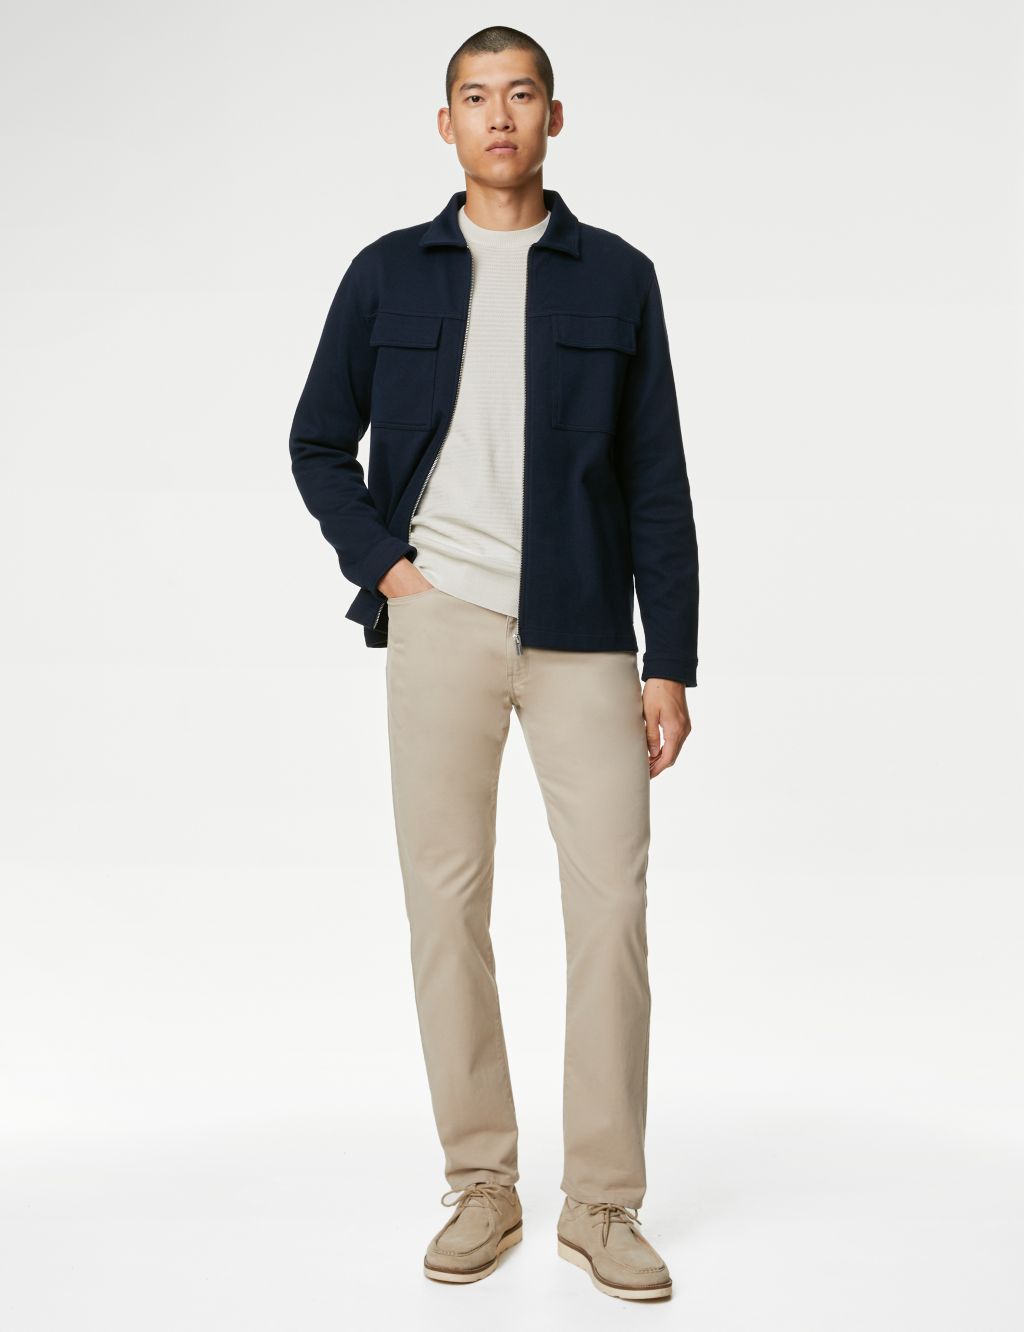 Cotton and Modal Blend Textured Crew Neck Jumper image 3